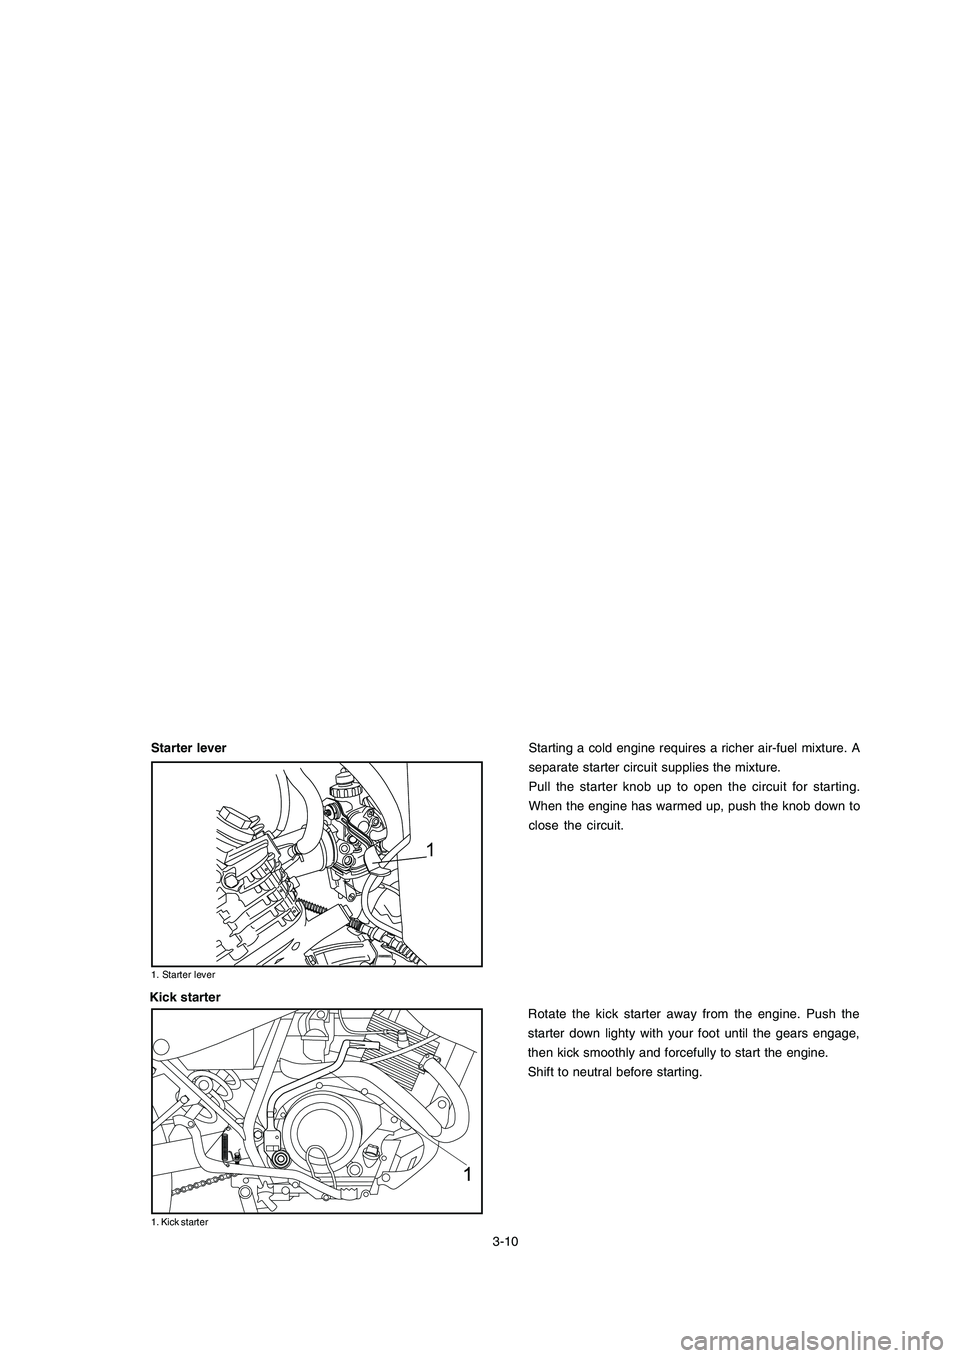 YAMAHA XTZ125 2008  Owners Manual 3-10
3-10
1
Starting a cold engine requires a richer air-fuel mixture. A
separate starter circuit supplies the mixture.
Pull the starter knob up to open the circuit for starting.
When the engine has w